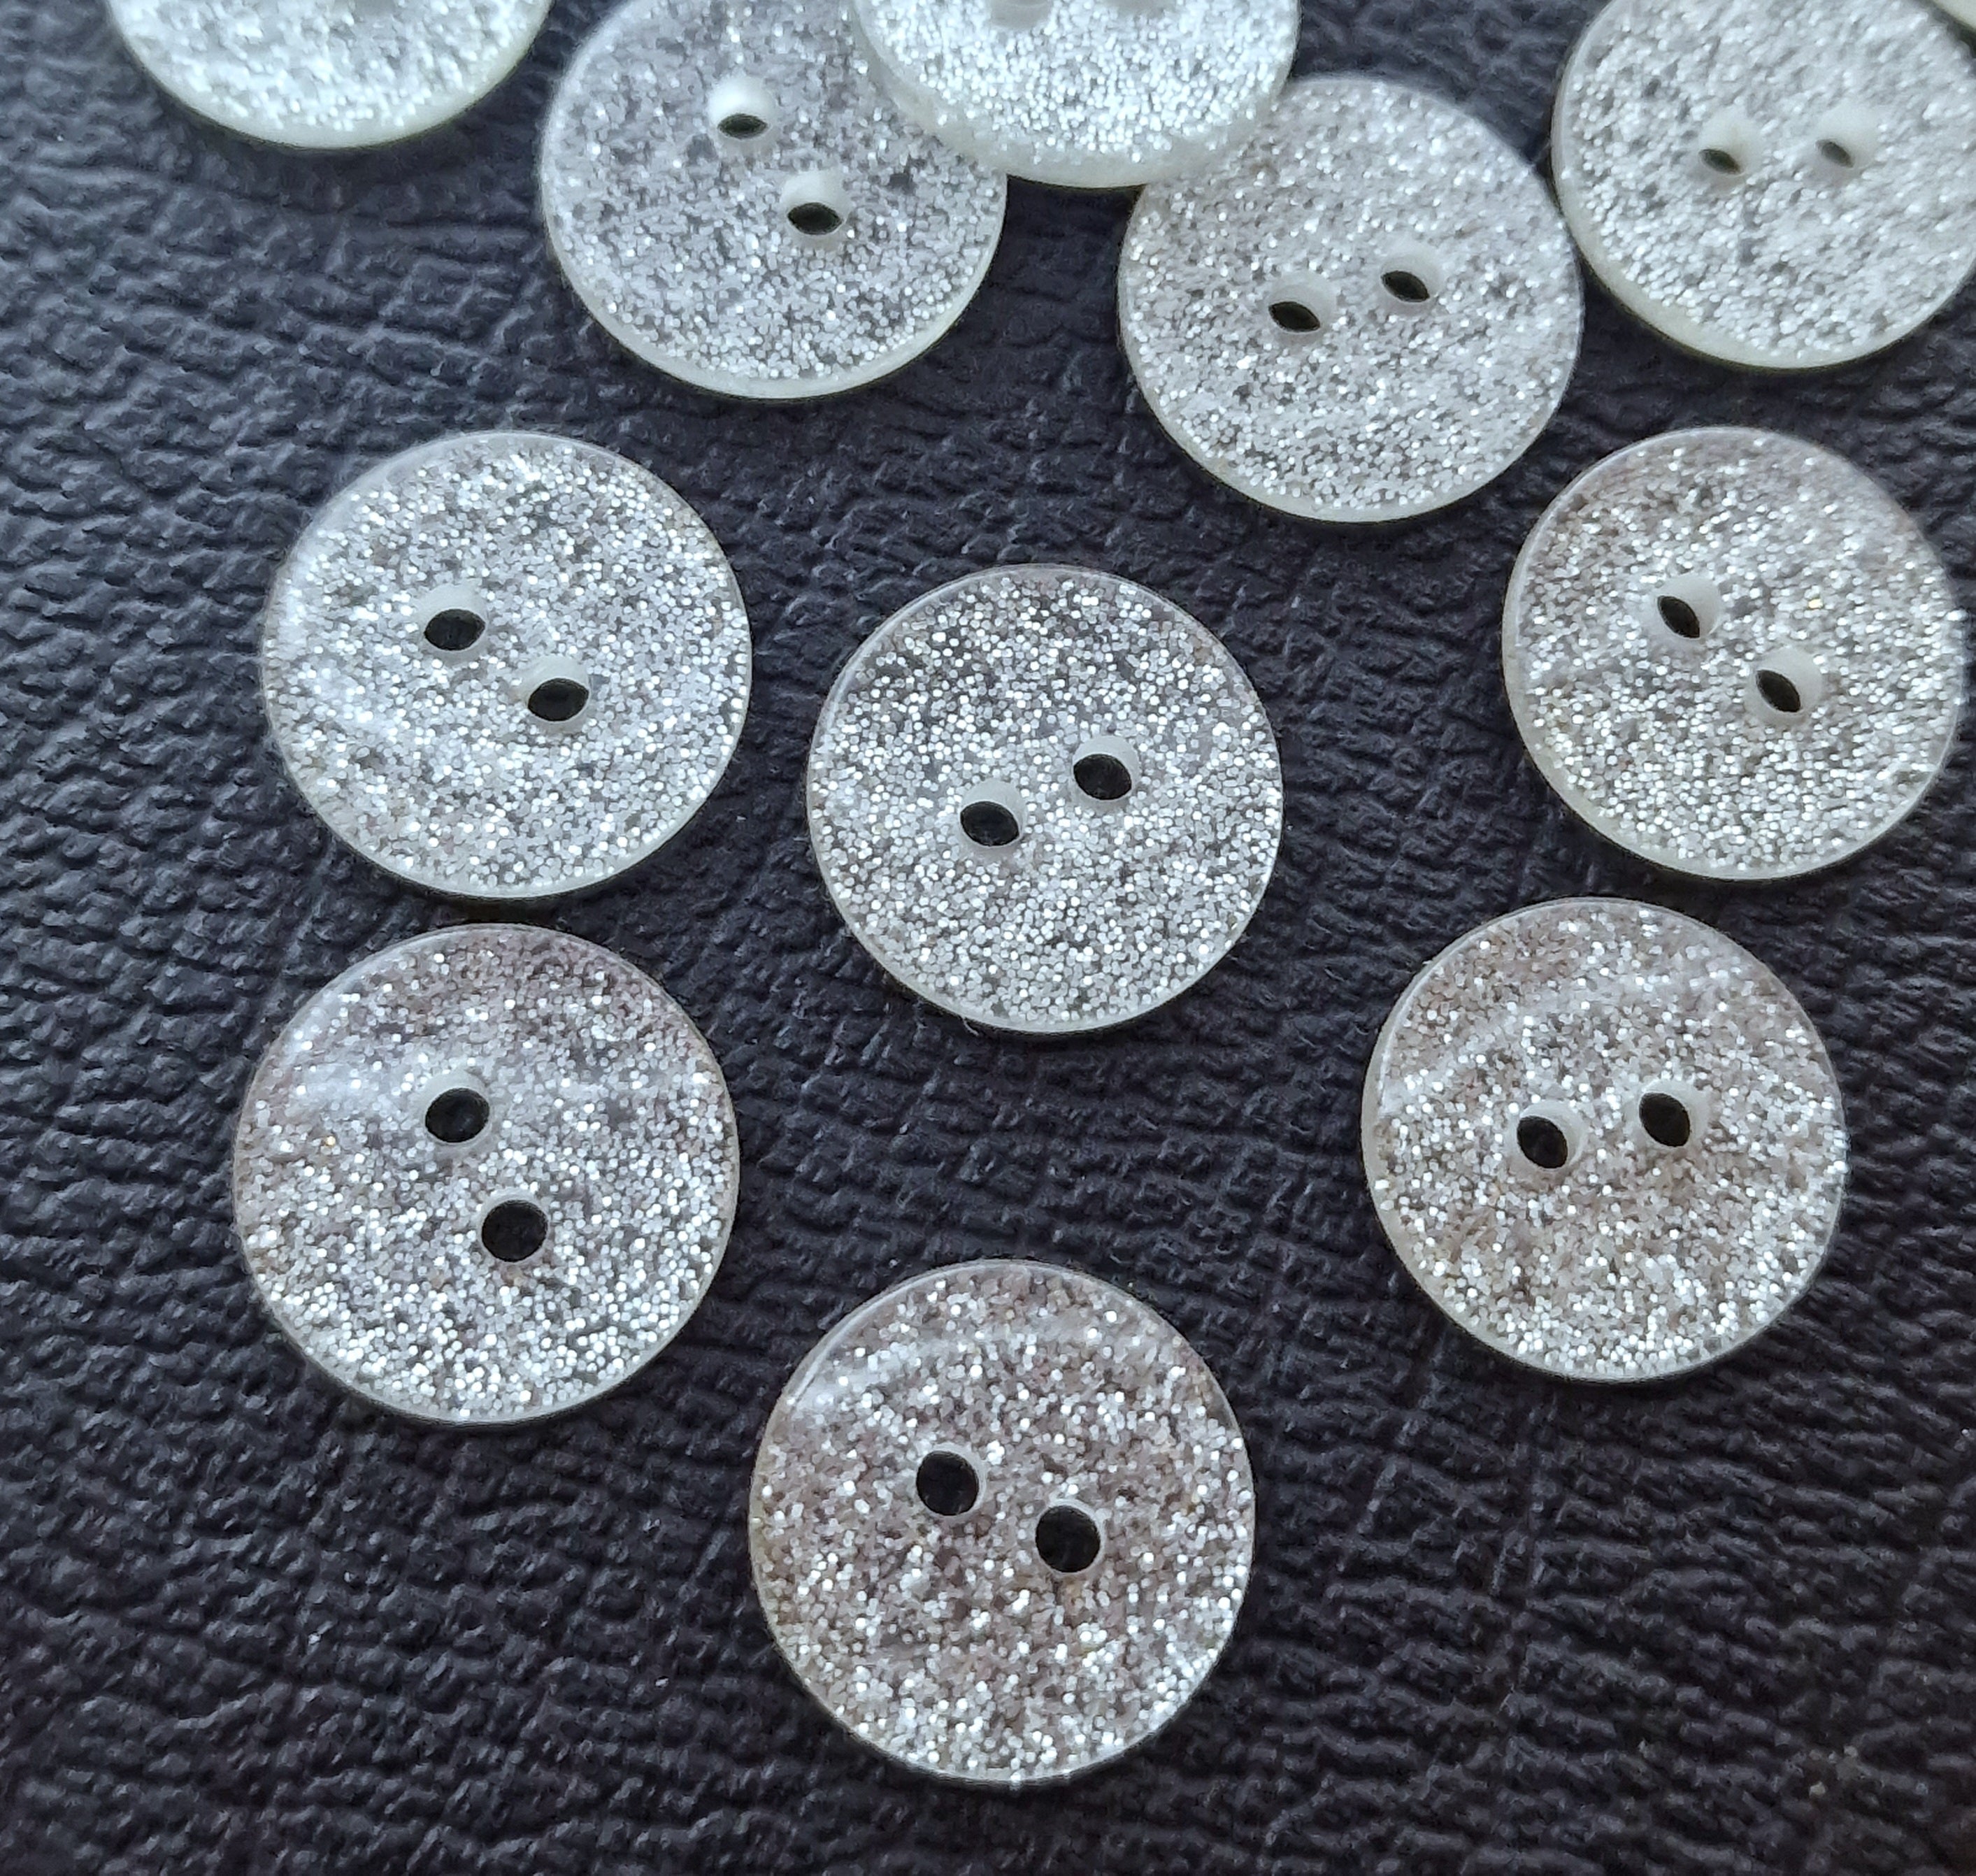 MajorCrafts 60pcs 12.5mm Clear Silver Glitter 2 Holes Round Sewing Resin Buttons